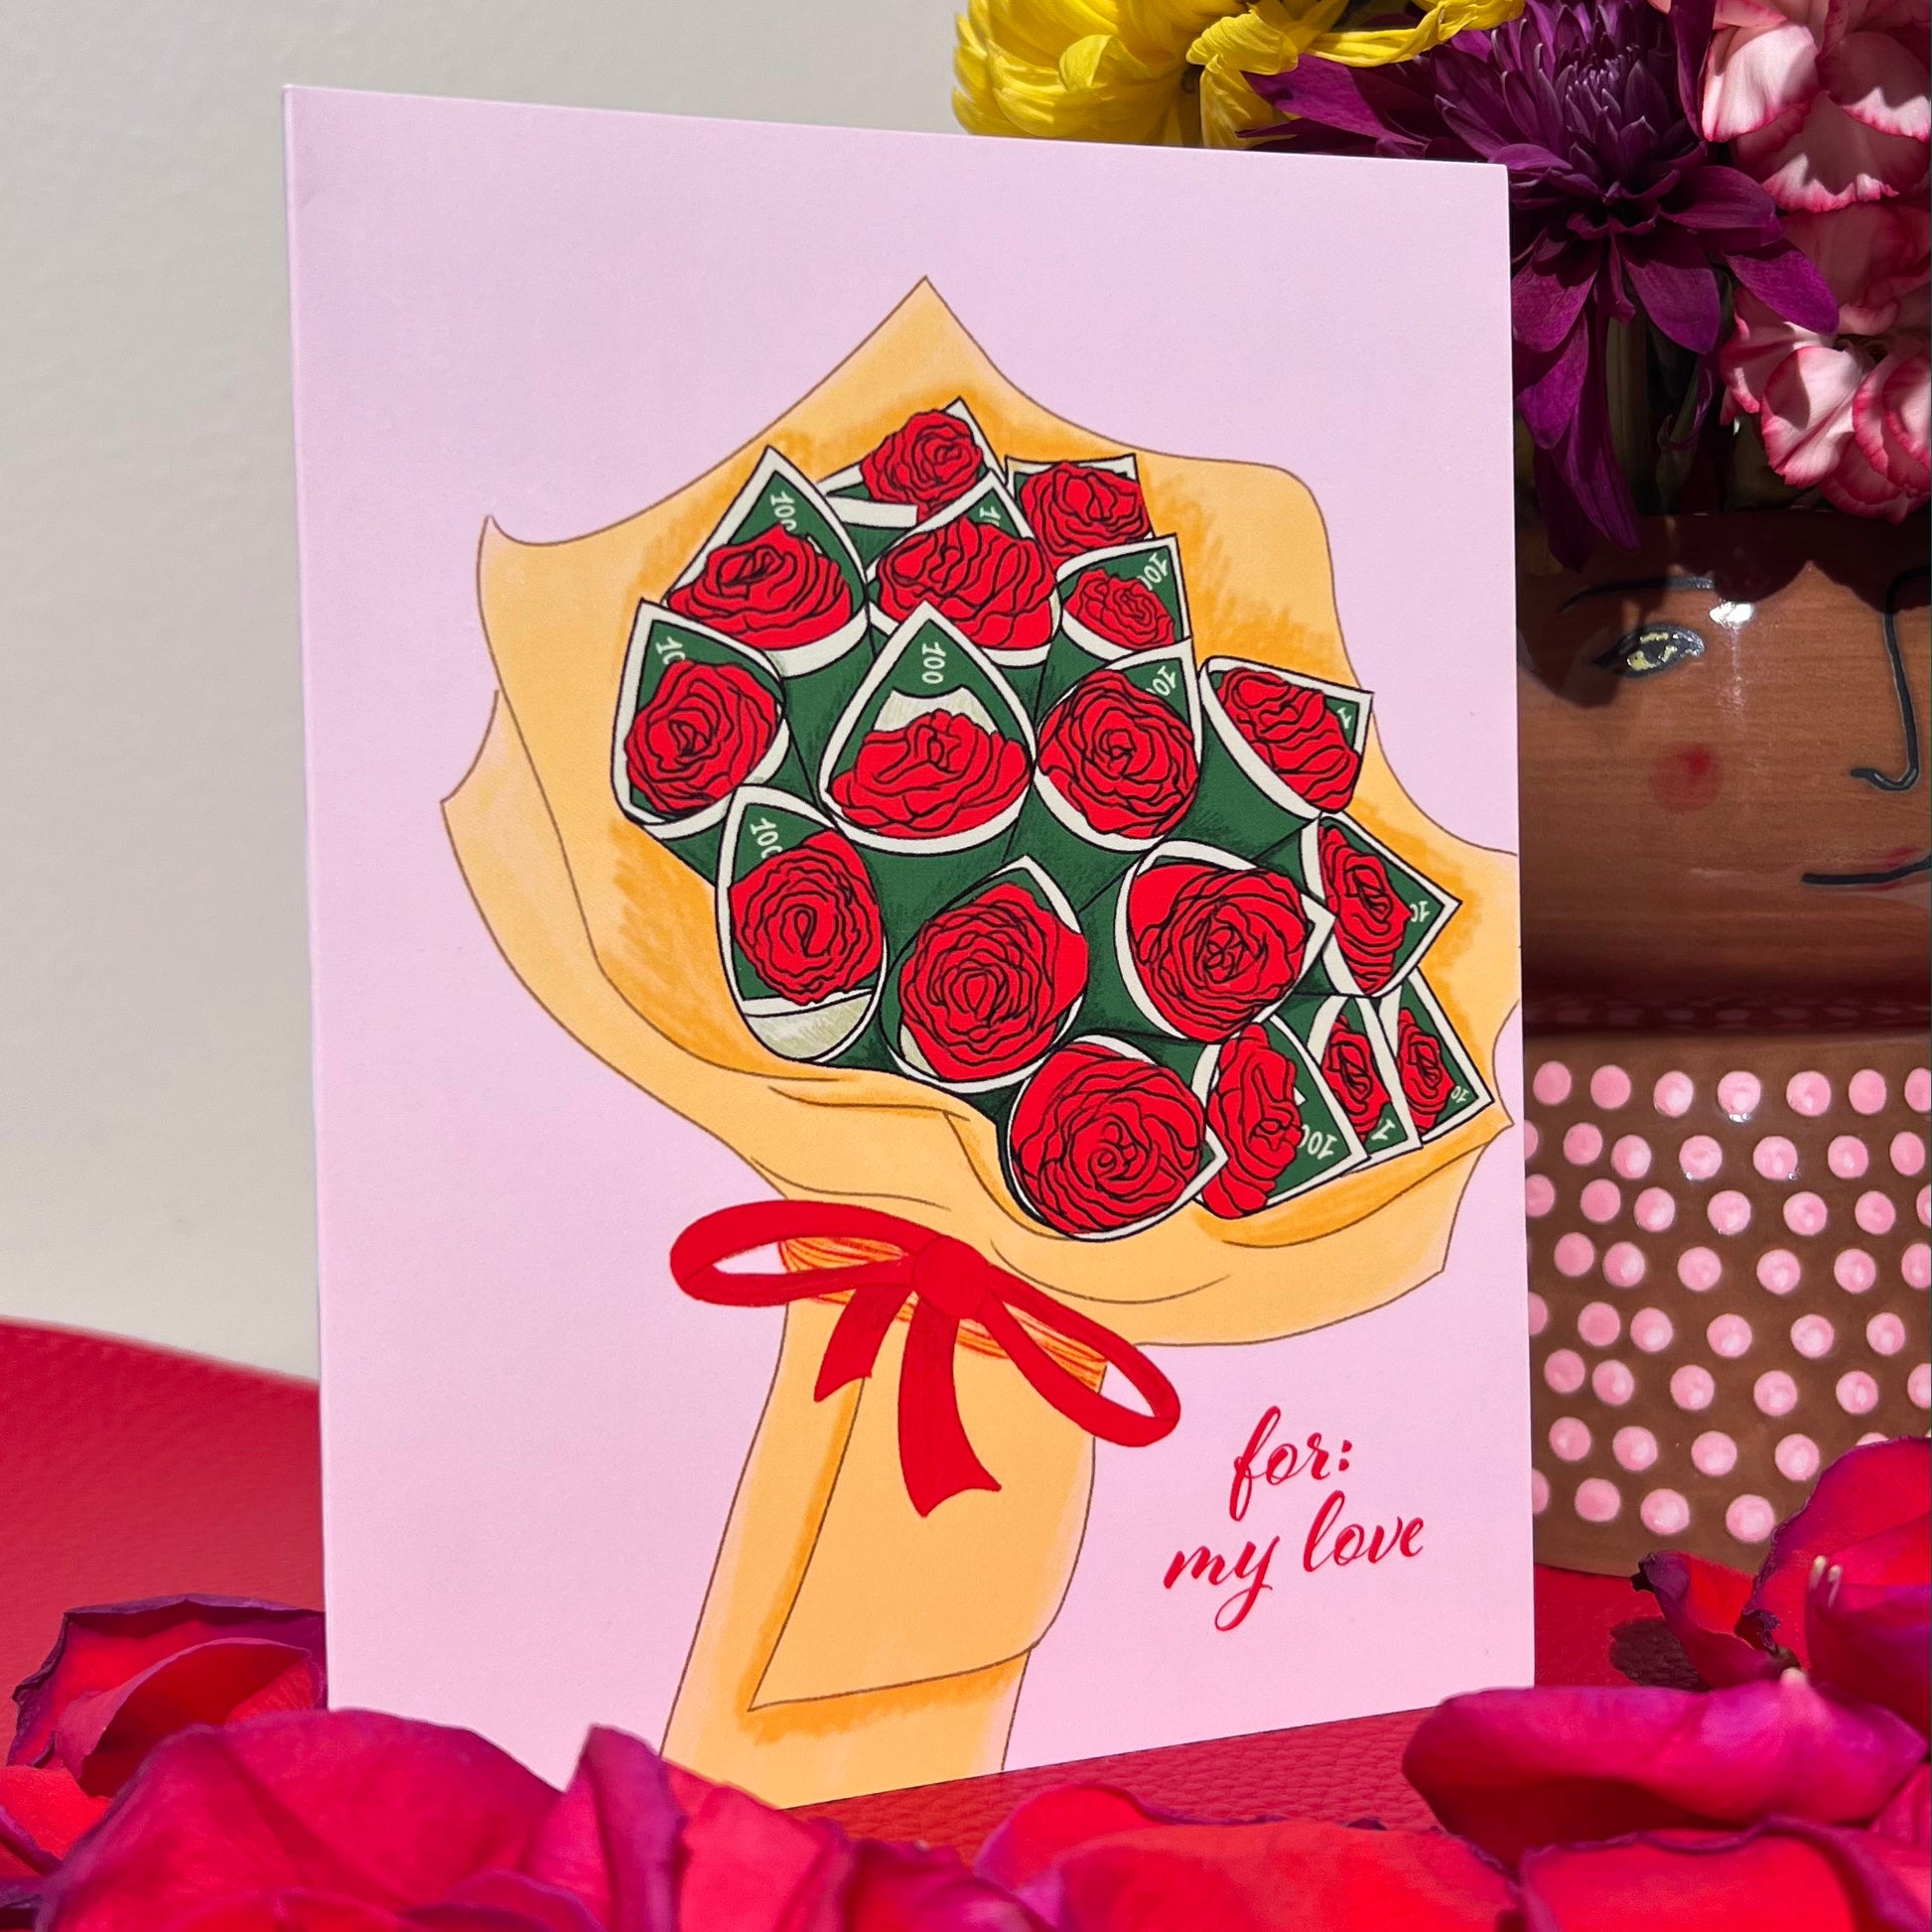 Send love with a romantic red rose money bouquet card, for a love that’s timeless. Explore our Love greeting cards for Valentine's Day and everyday. 